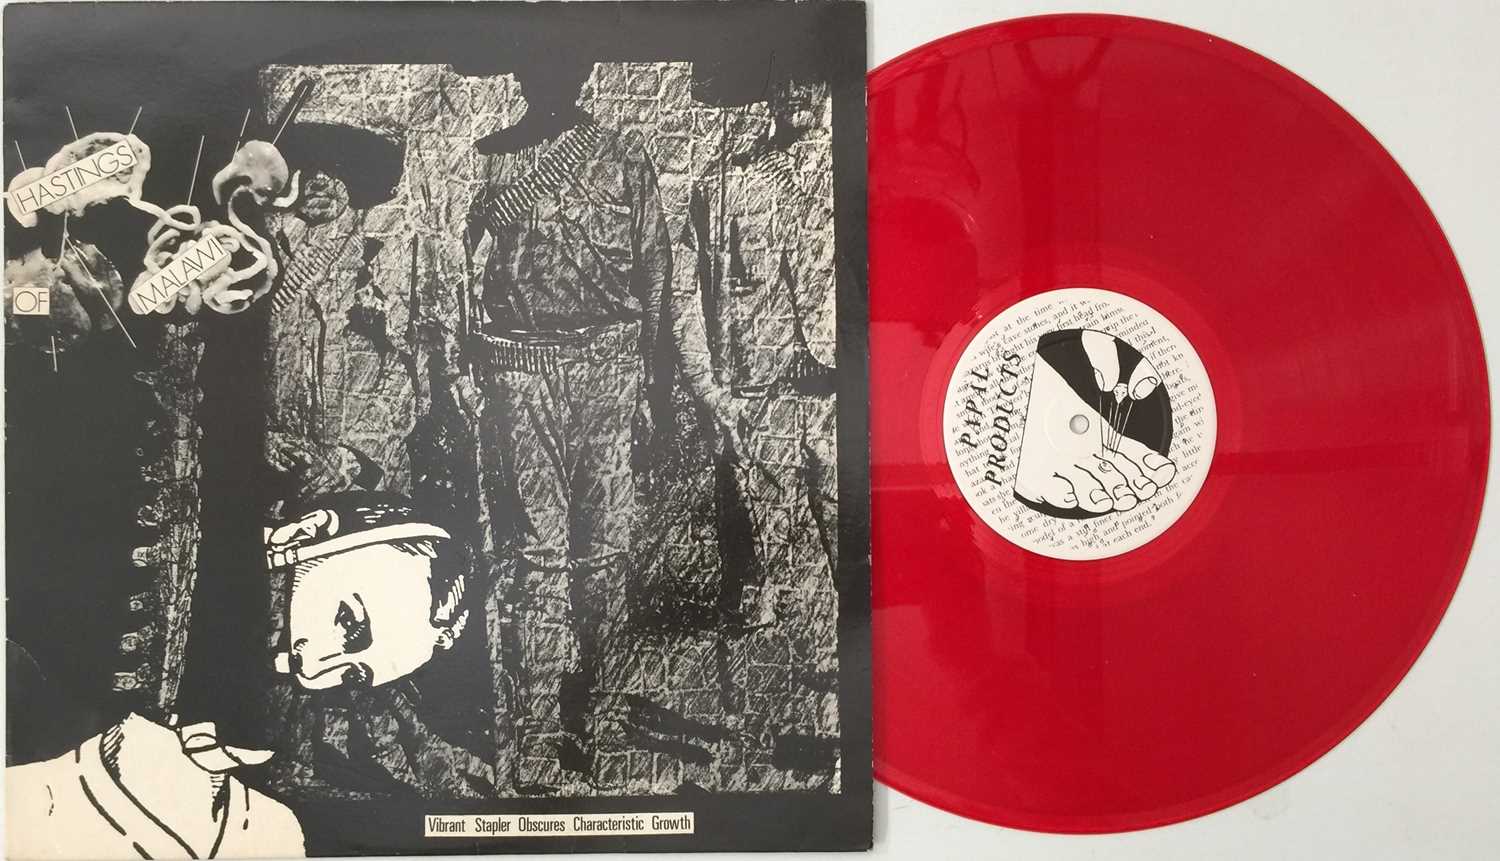 Lot 668 - HASTINGS OF MALAWI - VIBRANT STAPLER OBSCURES CHARACTERISTIC GROWTH LP (ORIGINAL UK RED VINYL COPY - PAPAL PRODUCTS 003)